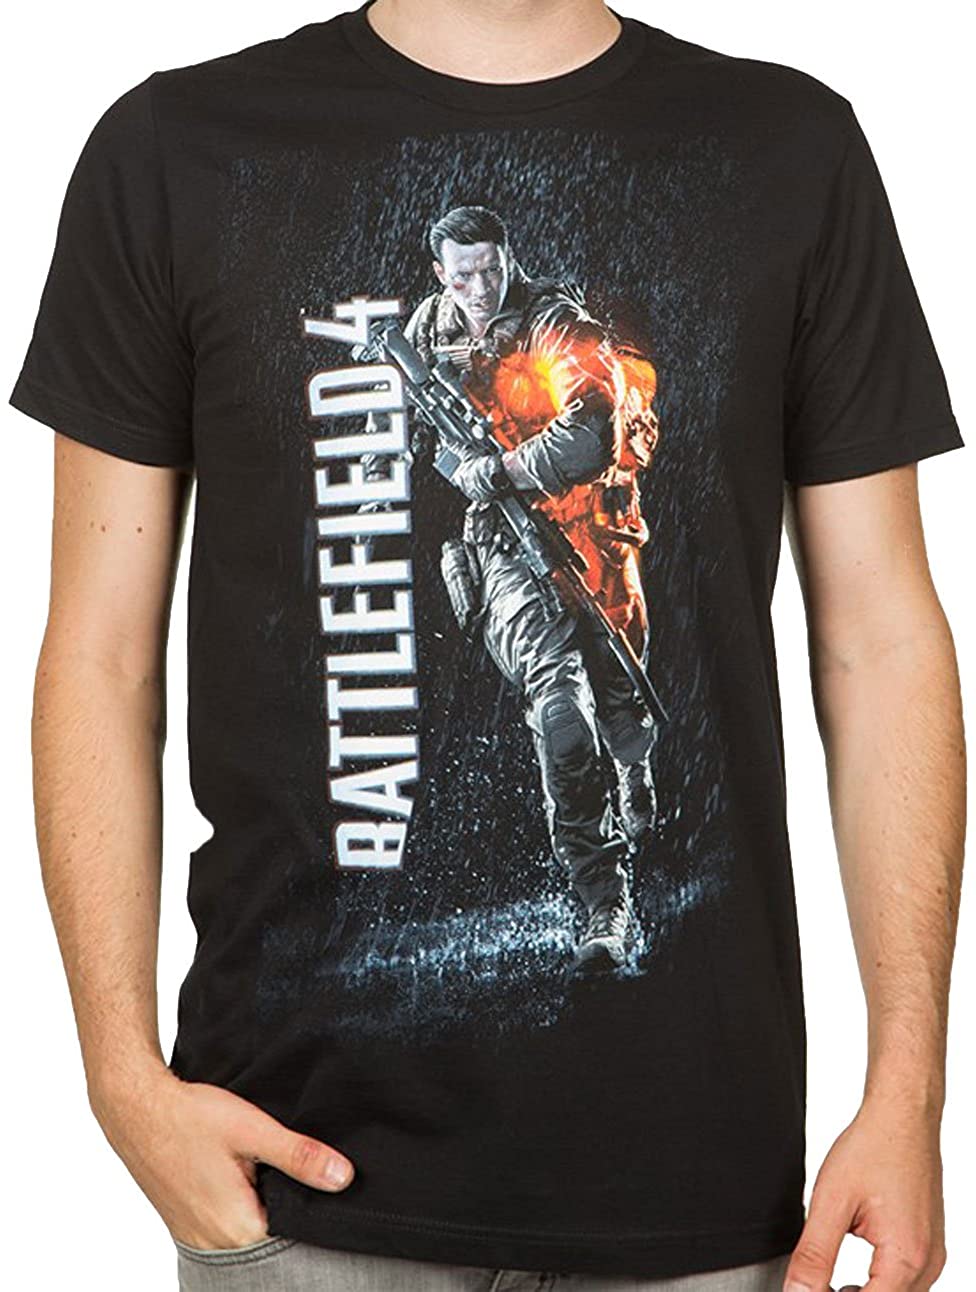 Battlefield 4 Video Game Black Color Licensed T-Shirt S-2XL (Small)